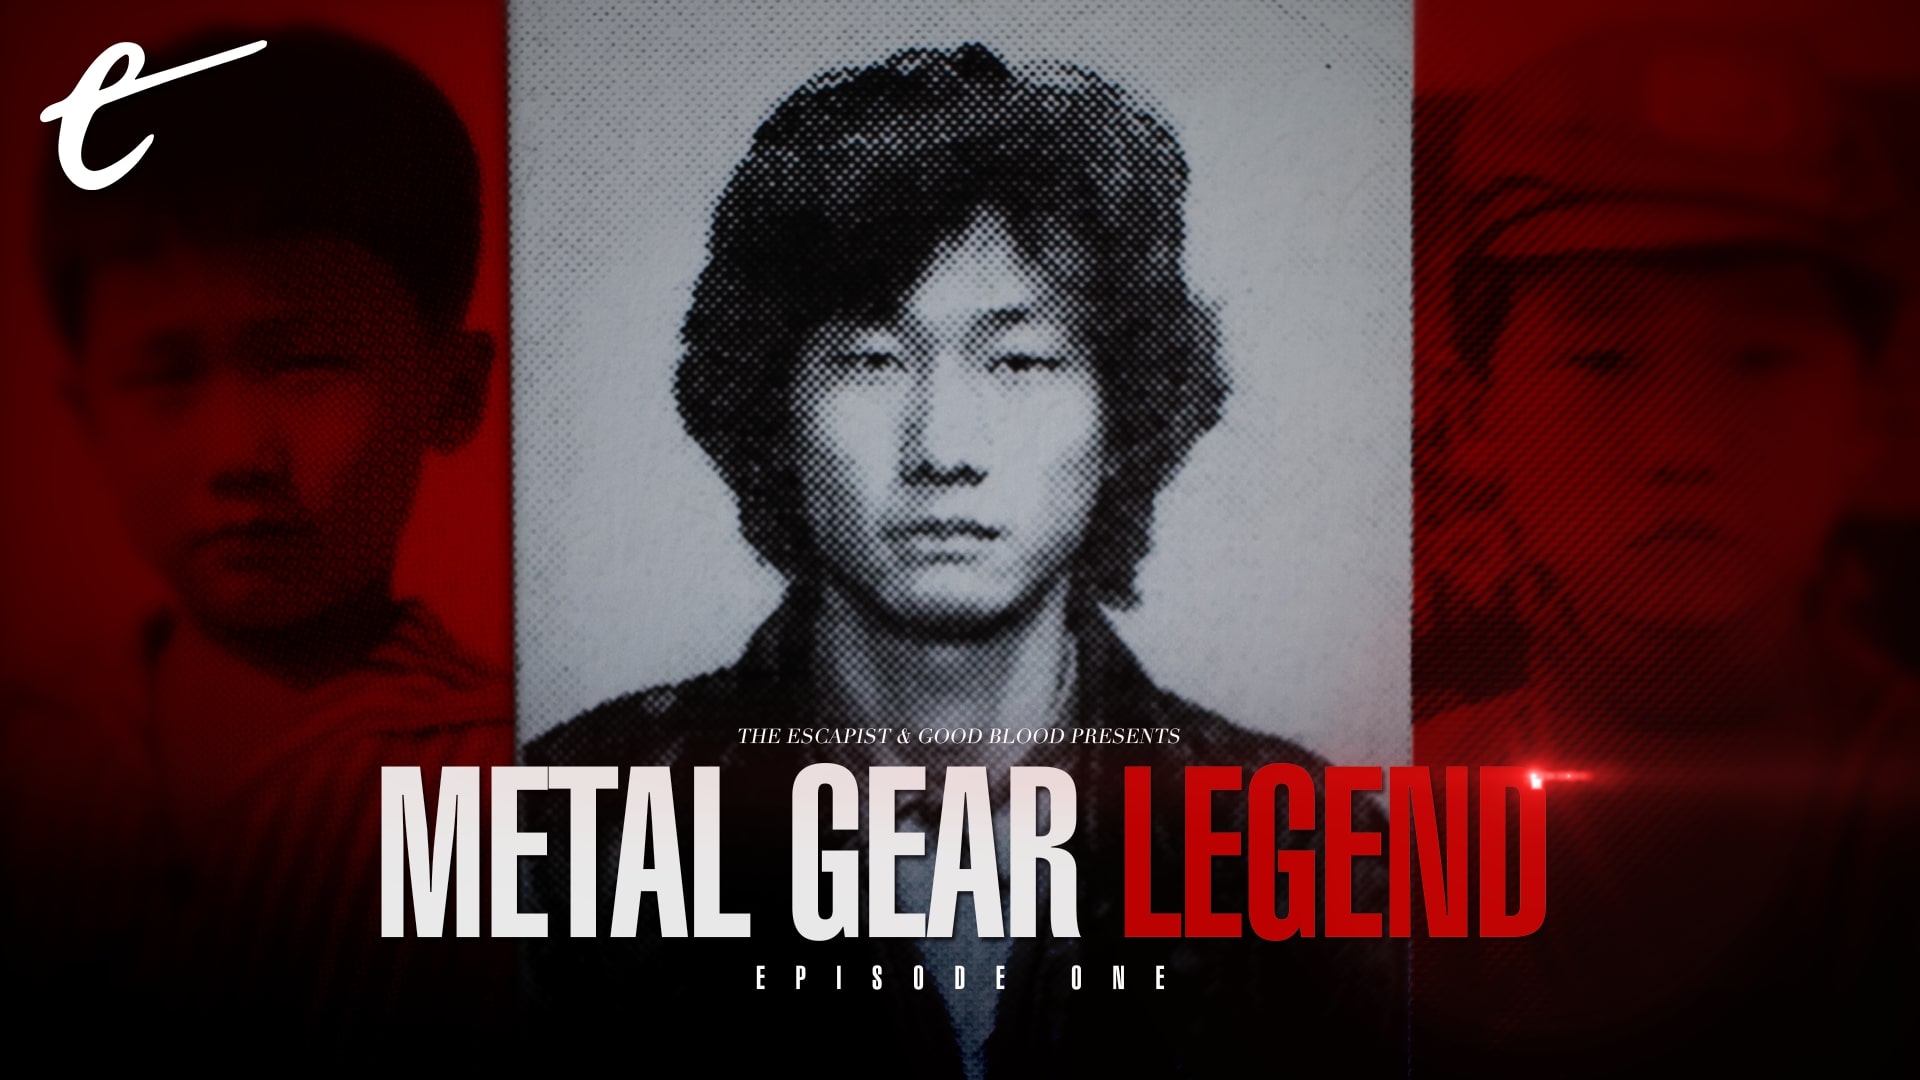 Metal Gear Legend is an original series exploring the personal conflicts of its creator and how Hideo Kojima rewrites historical details to overcome them.